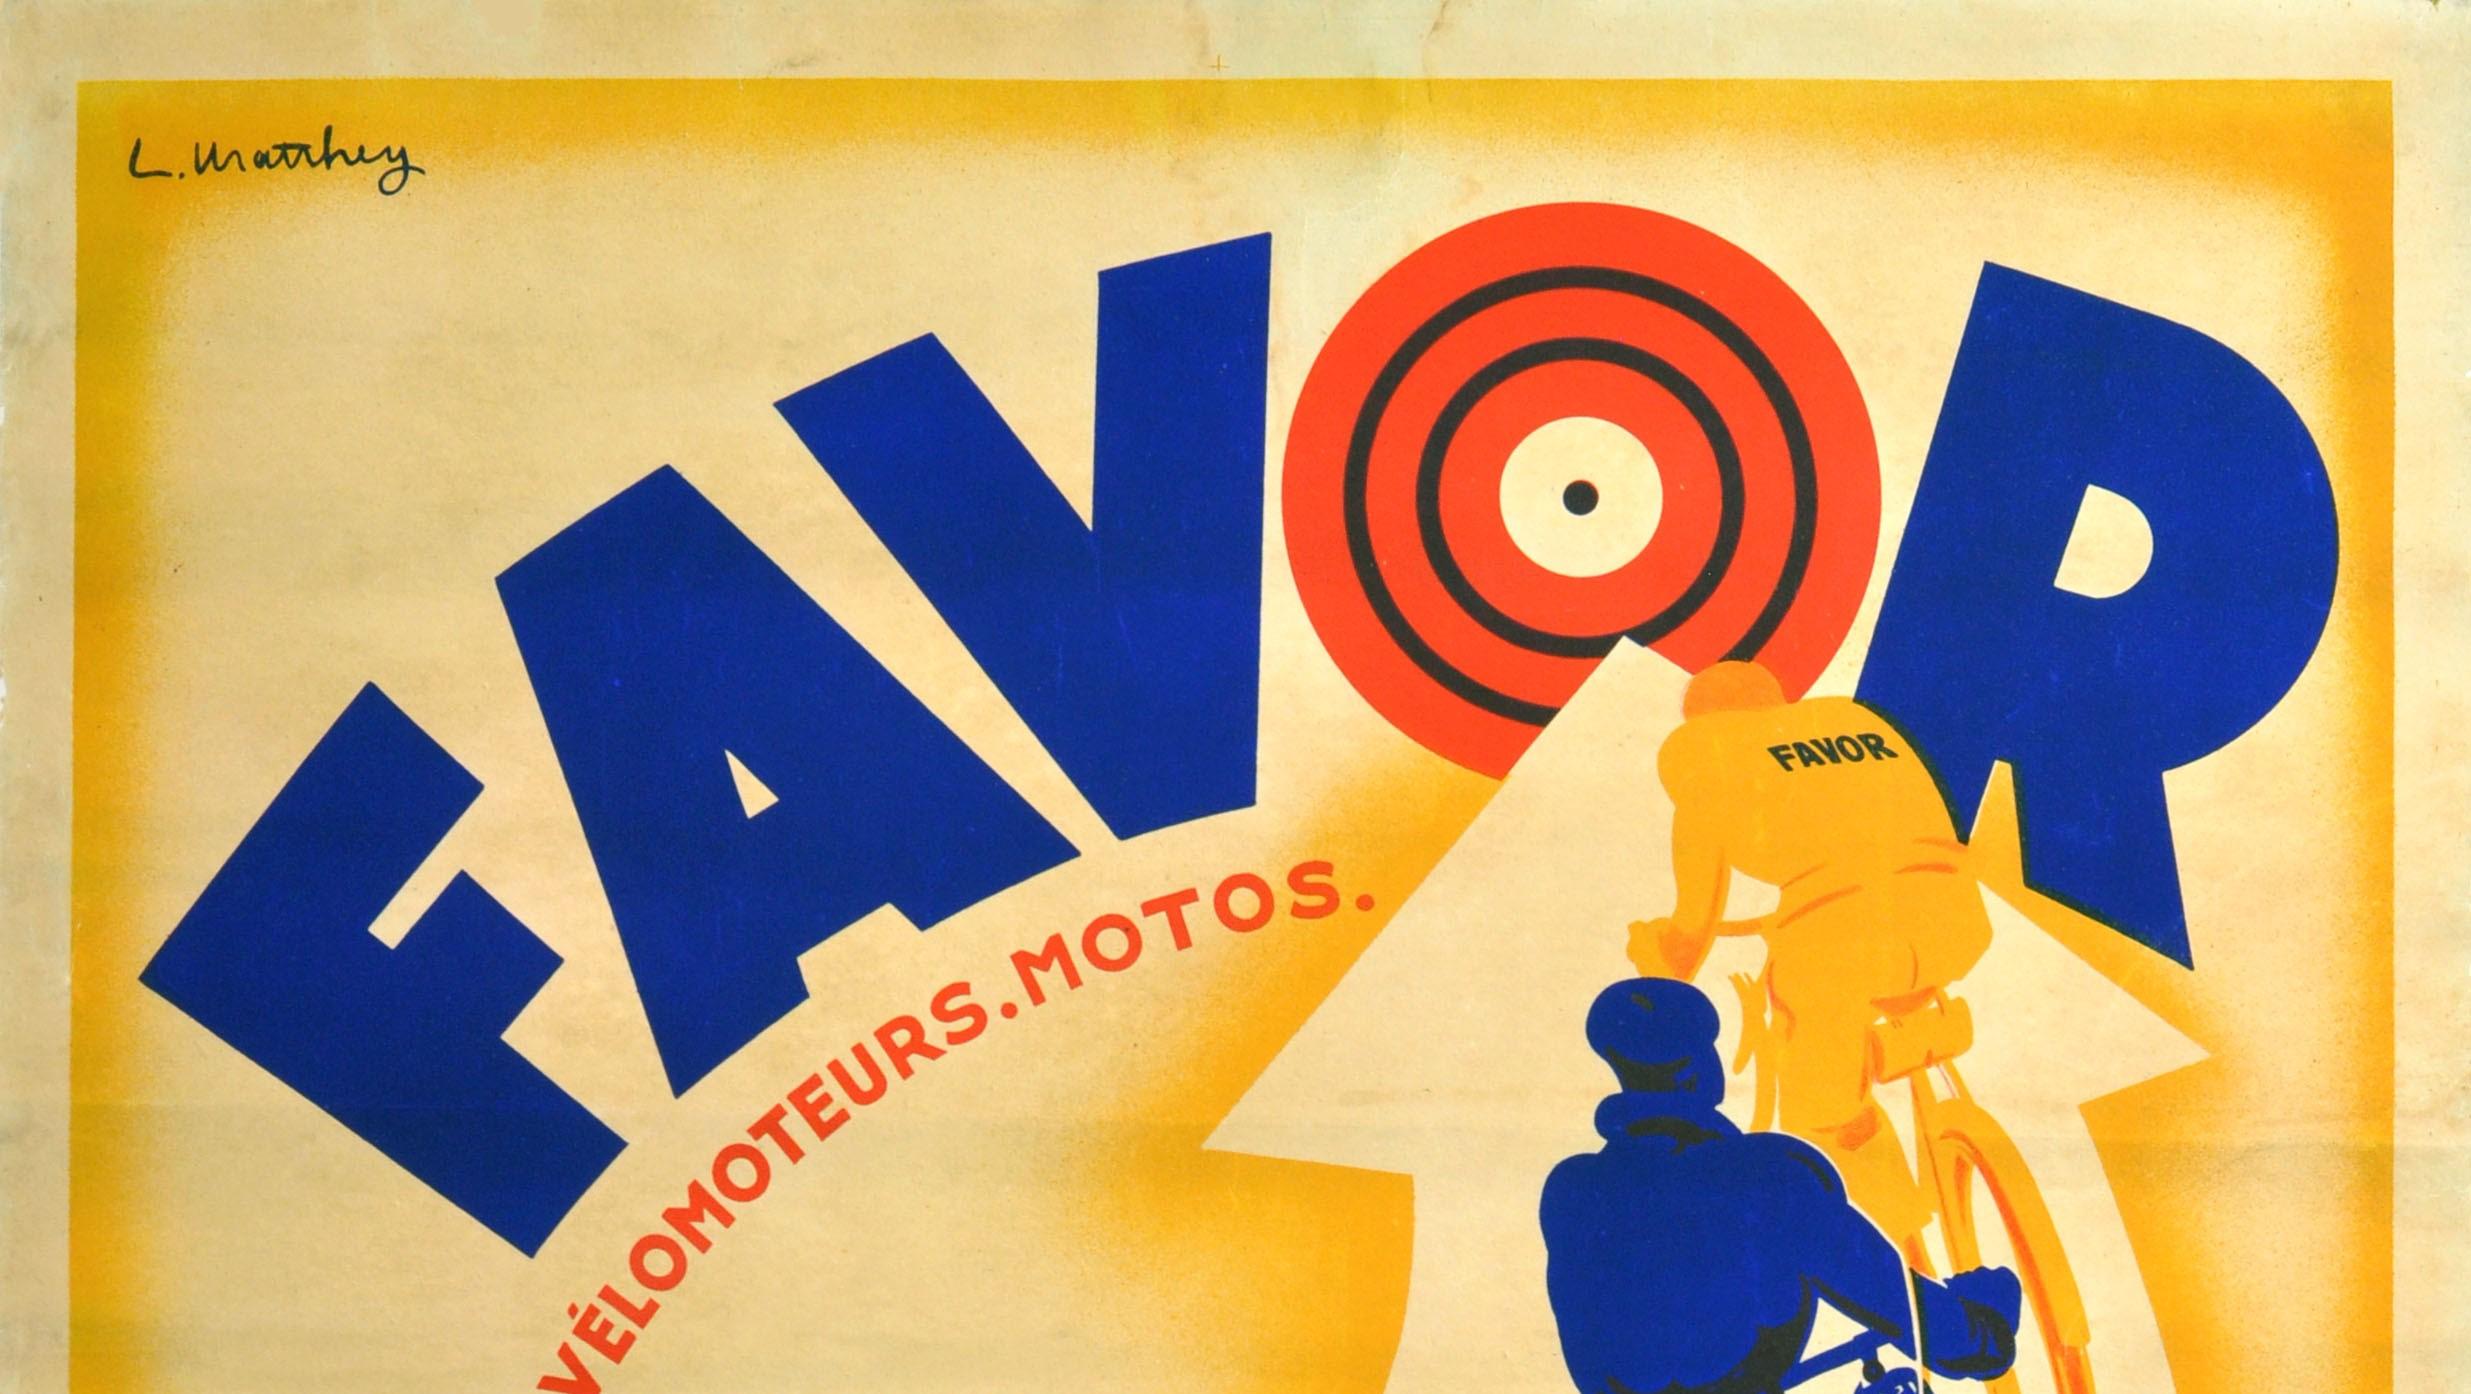 Original vintage advertising poster for Favor Cycles, Velomoteurs, Motos. Colourful image featuring three riders on their bicycles and motorbikes along an arrow pointing to the bulls eye target in the O of Favor with the slogan 